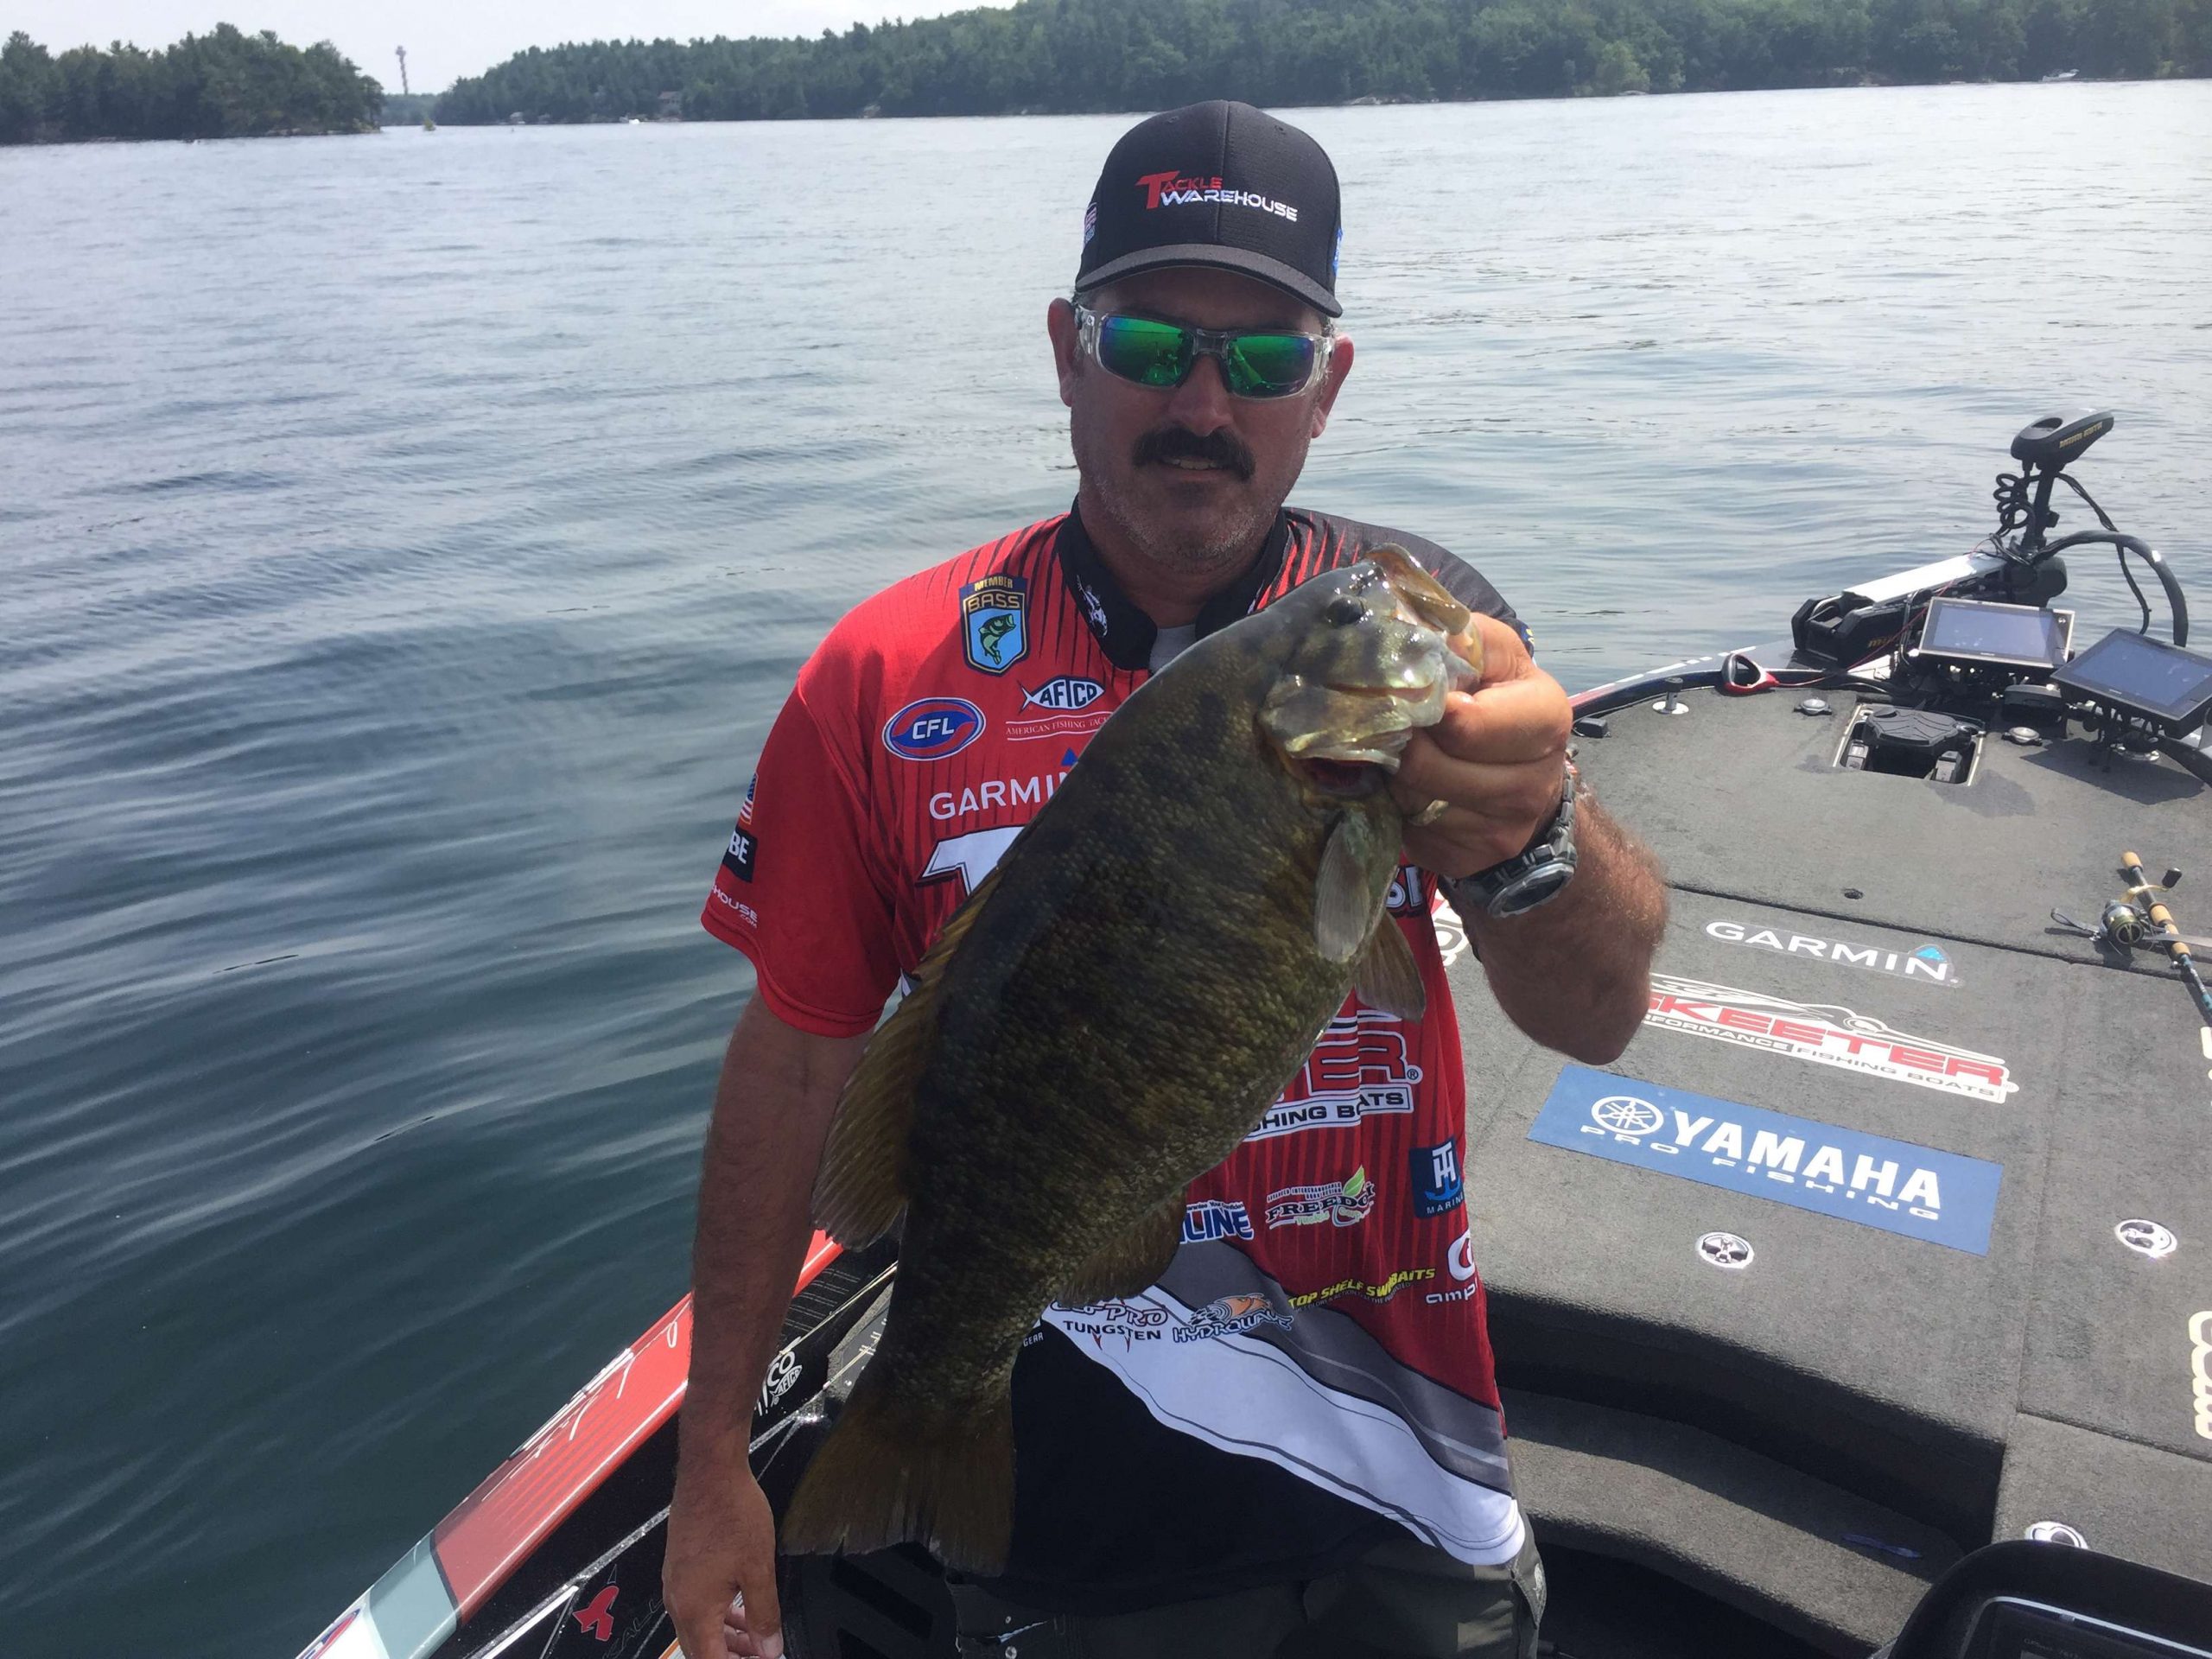 After a quick limit this morning, Jared Lintner went a while without catching many keepers, but he kept grinding and his patience paid off with this St. Lawrence River slab.